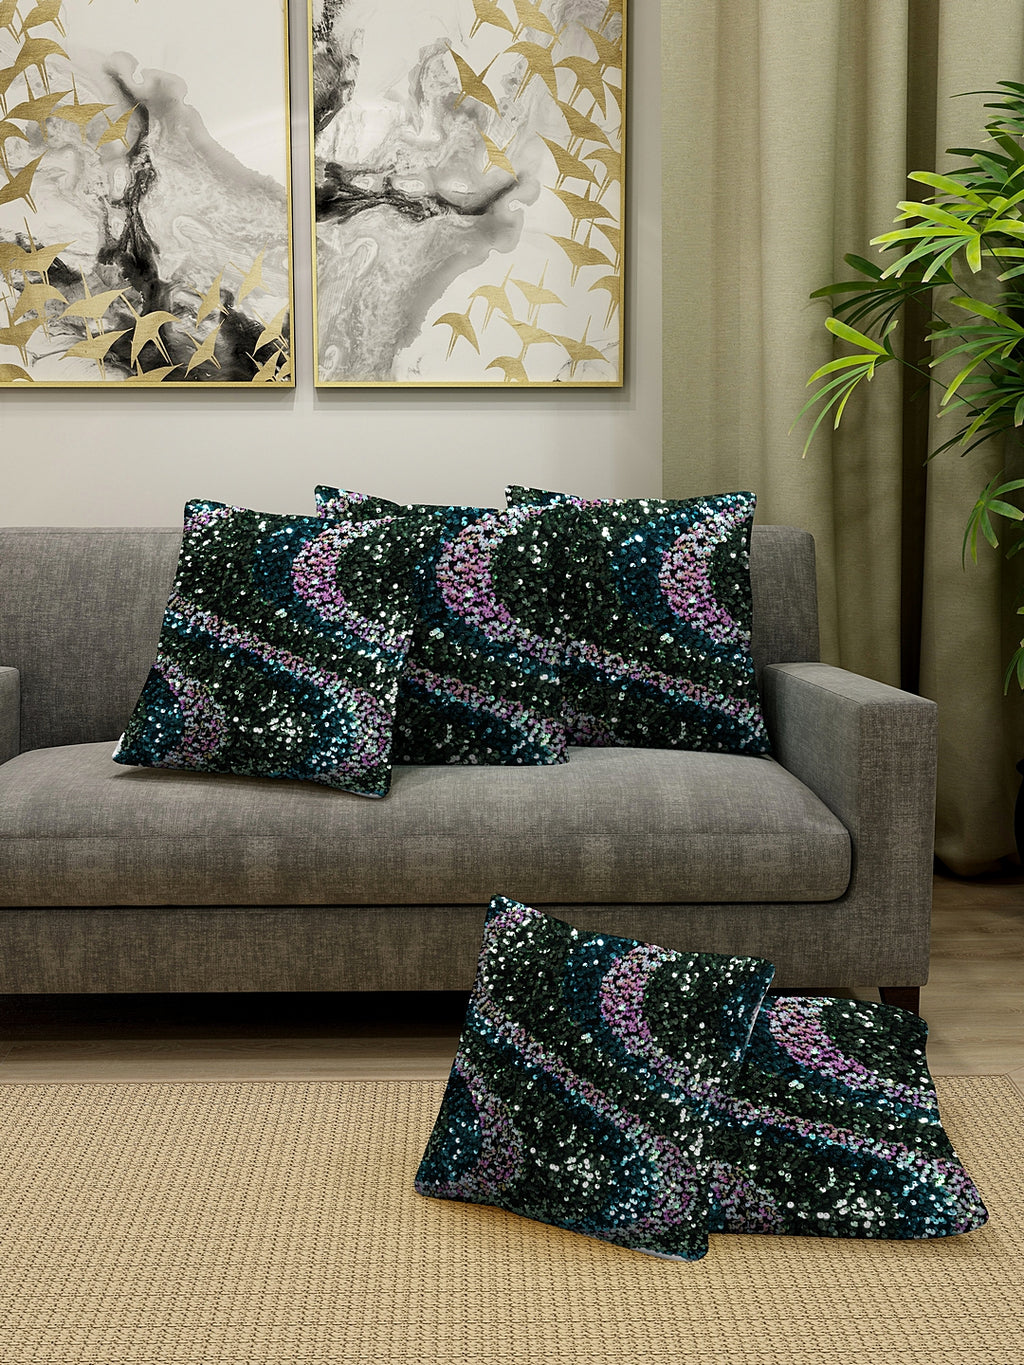 Detec™ Hosta Multi Color Sequence Detailing Cushion Cover (16 x 16 inches) Set of 5 pcs.